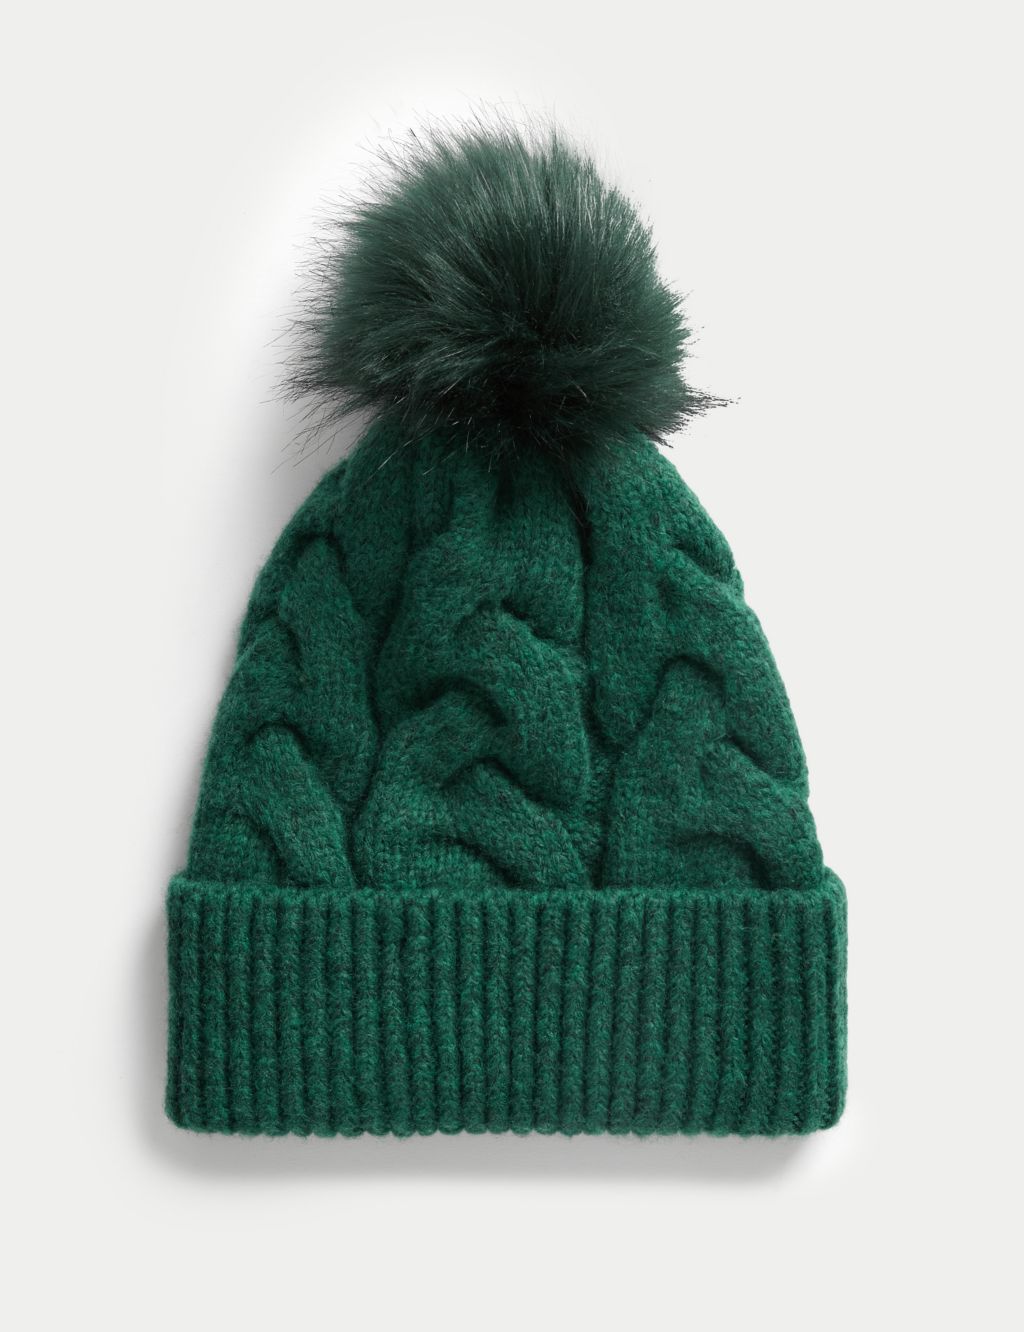 Knitted Cable Faux Fur Pom Hat image 1